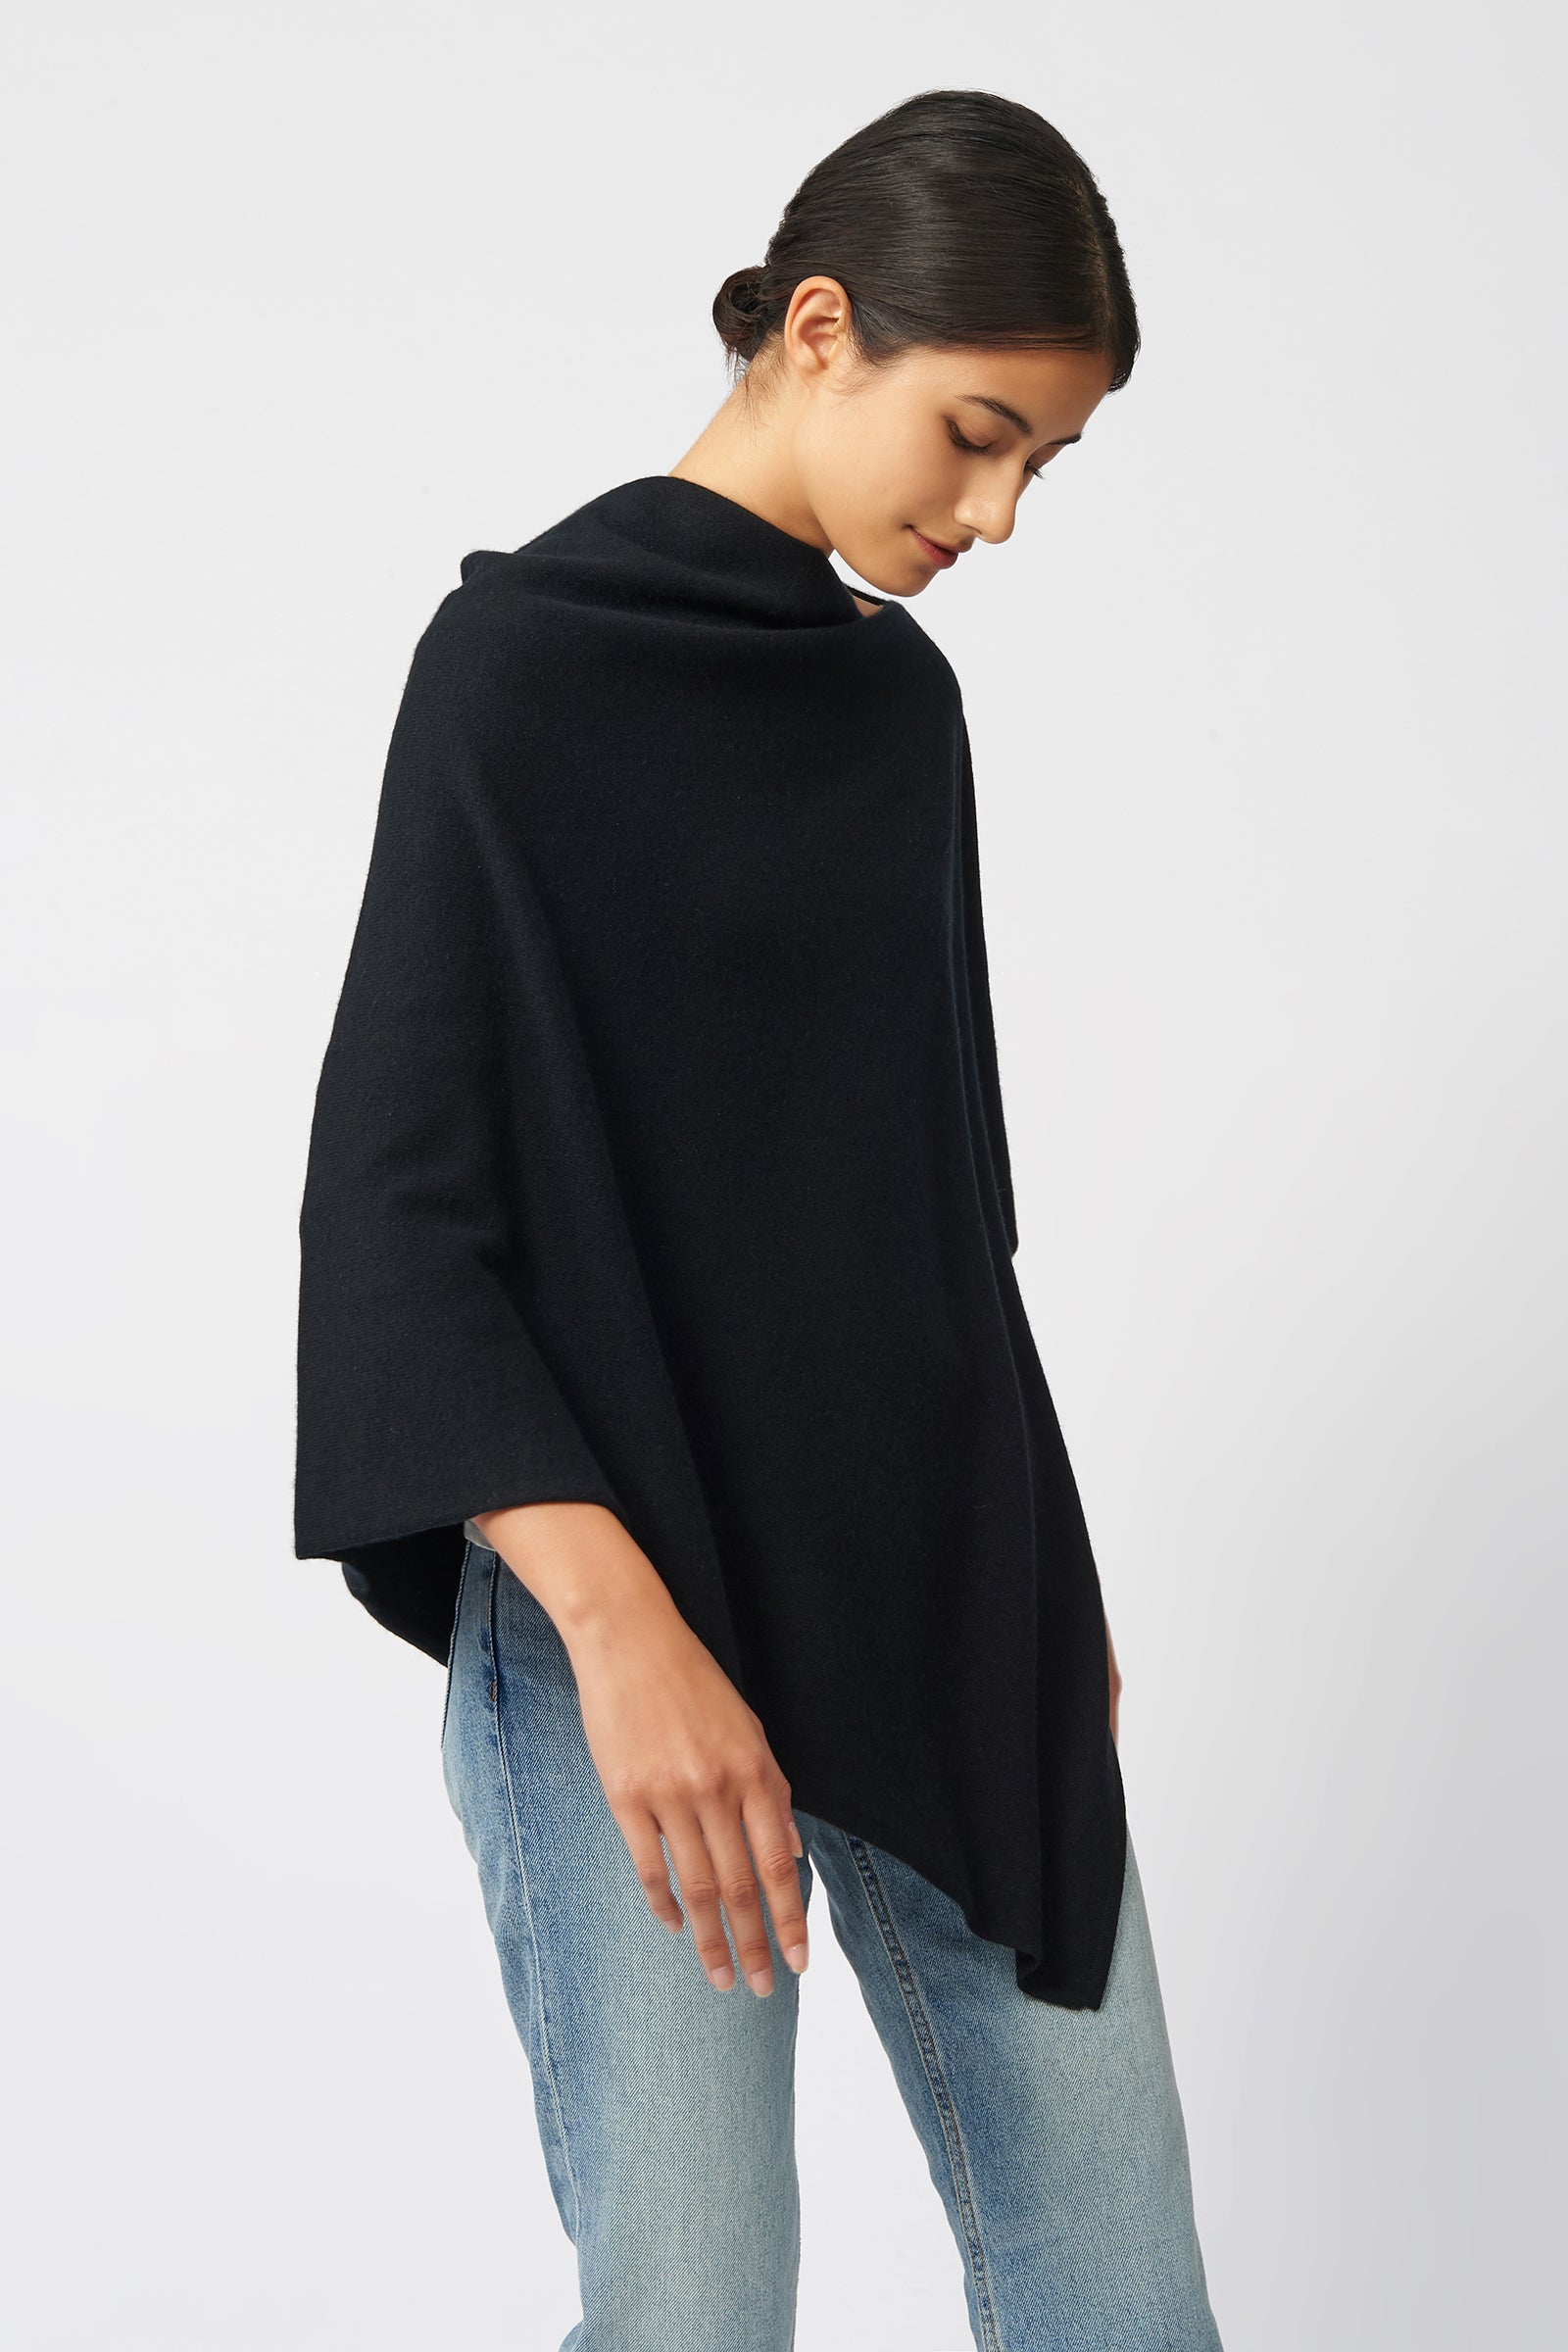 Kal Rieman Cashmere Poncho in Black on Model Side View